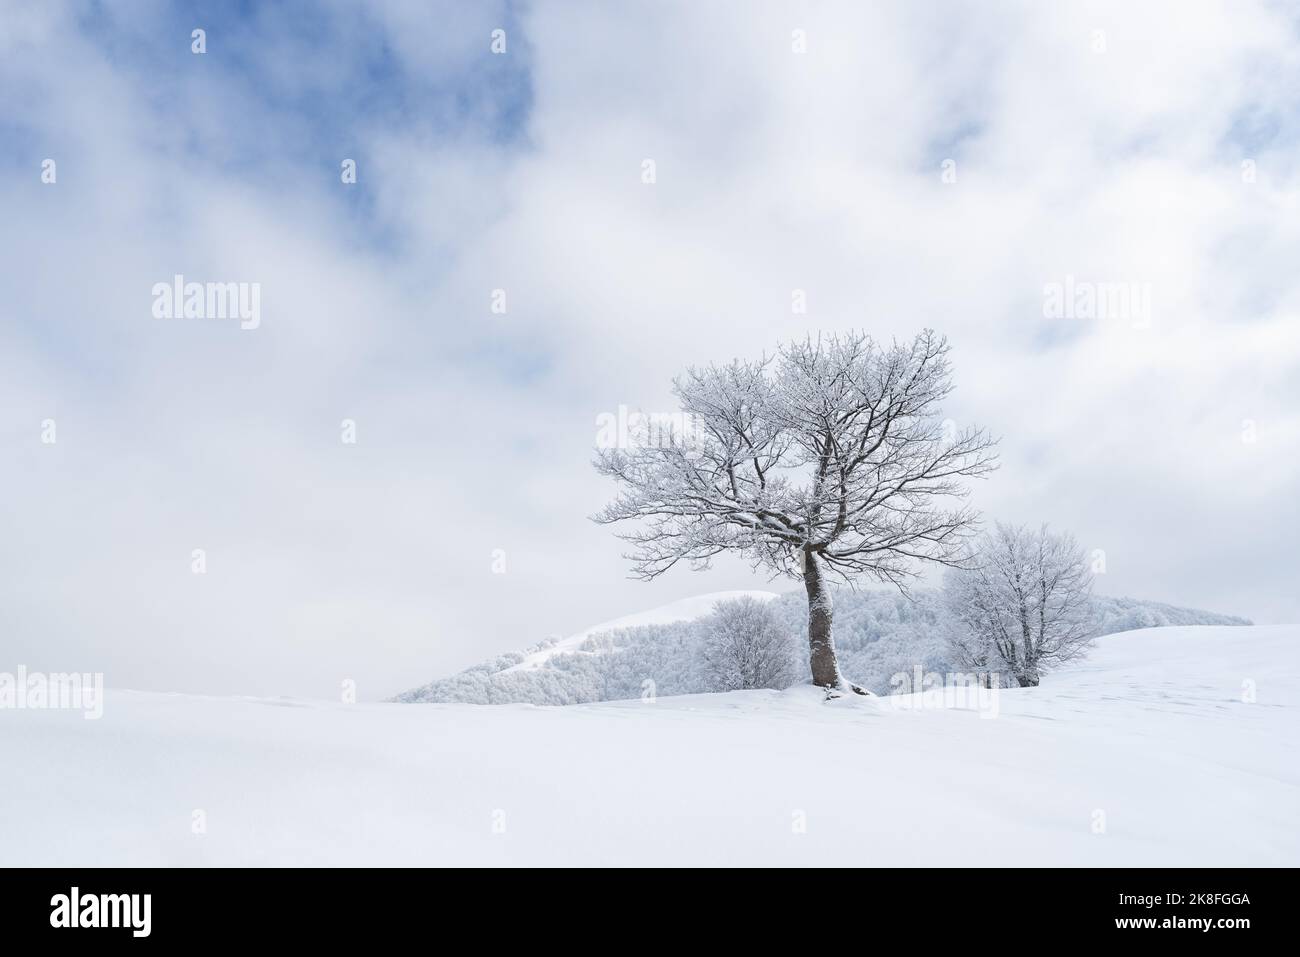 Winter landscape with a tree in the snowy mountains Stock Photo